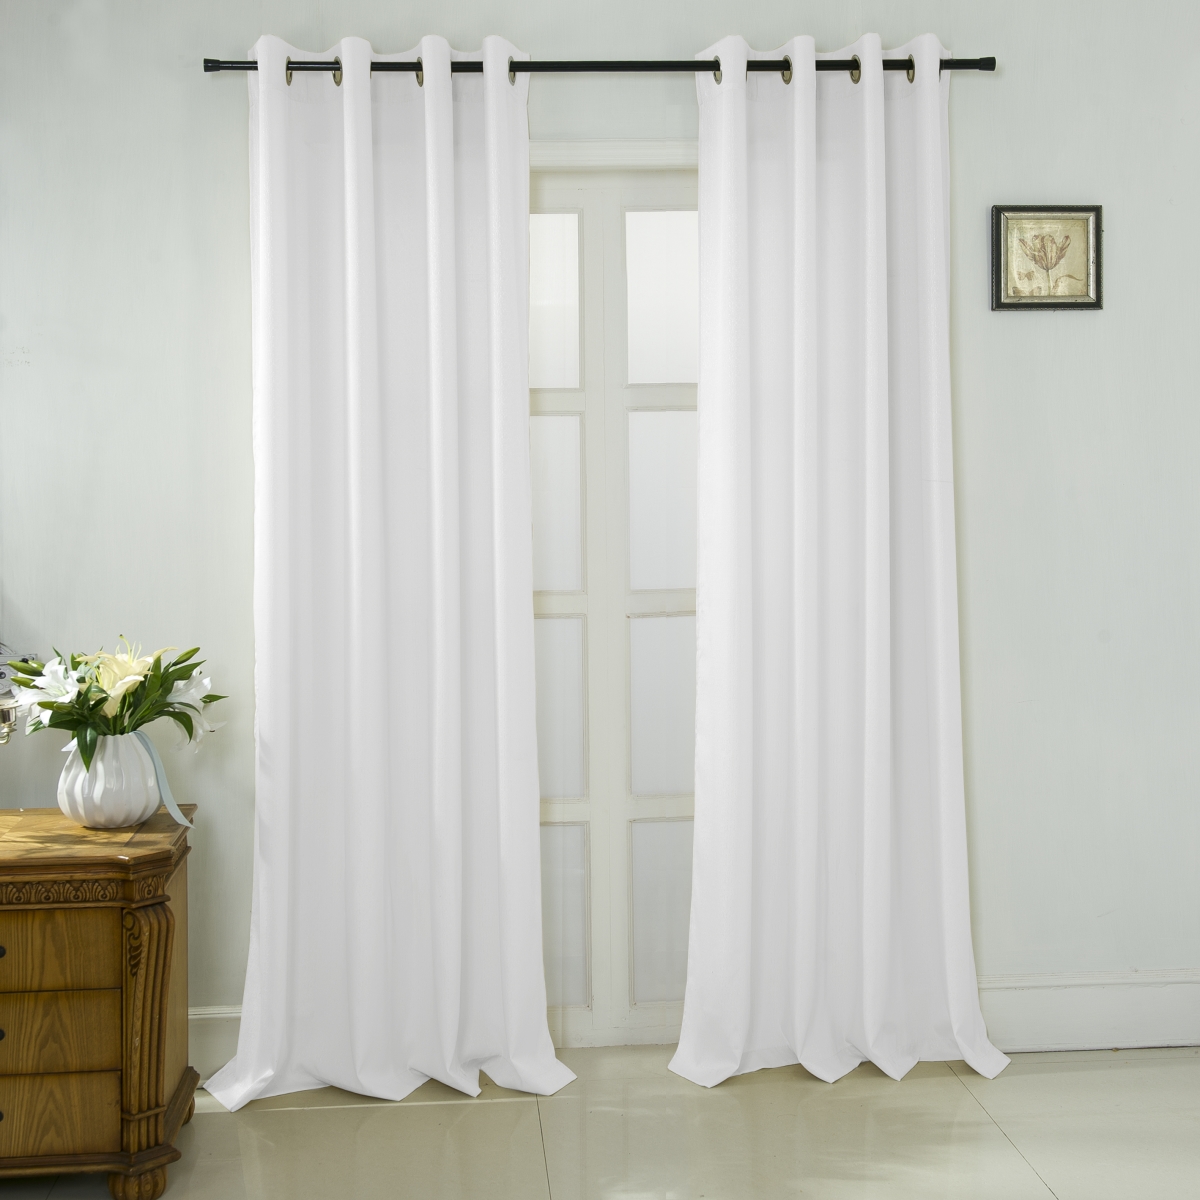 Pnl18897 108 X 84 In. Lindsey Textured Jacquard Extra Wide Grommet Curtain Panel Pair In White - Set Of 2